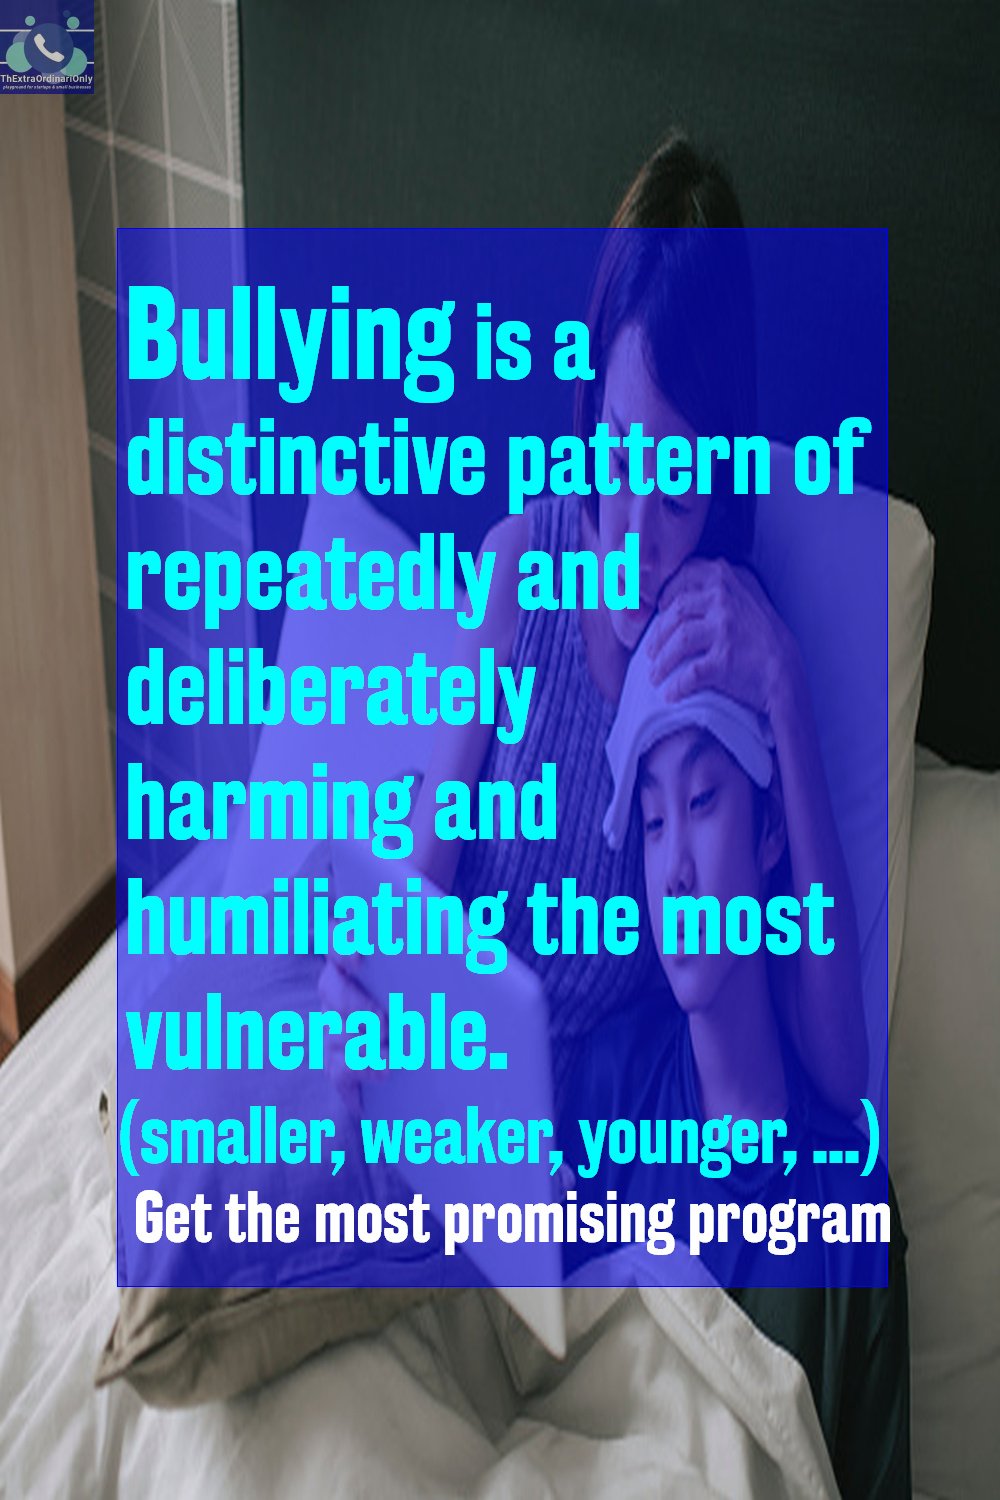 Bullying is a distinctive pattern of repeatedly and deliberately harming and humiliating the most vulnerable